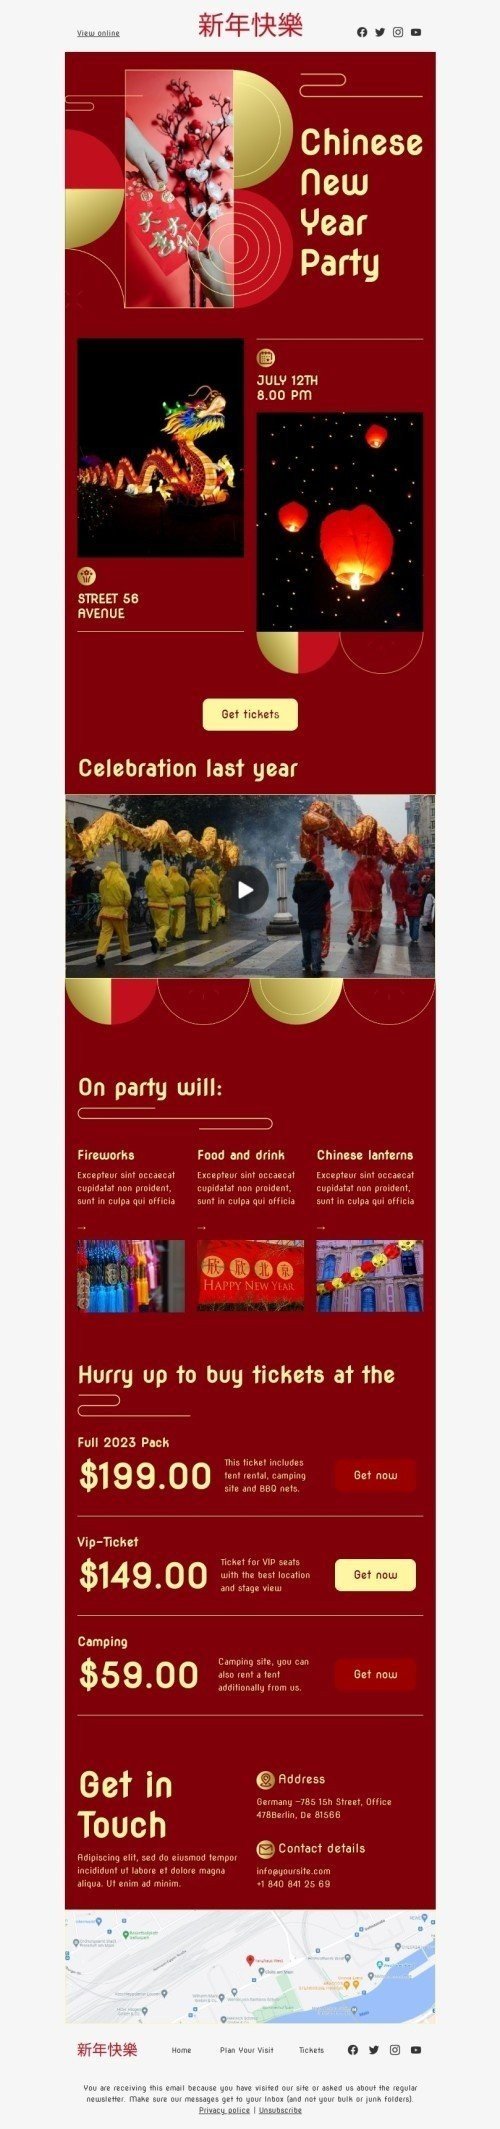 Chinese New Year email template "Chinese New Year party" for hobbies industry mobile view